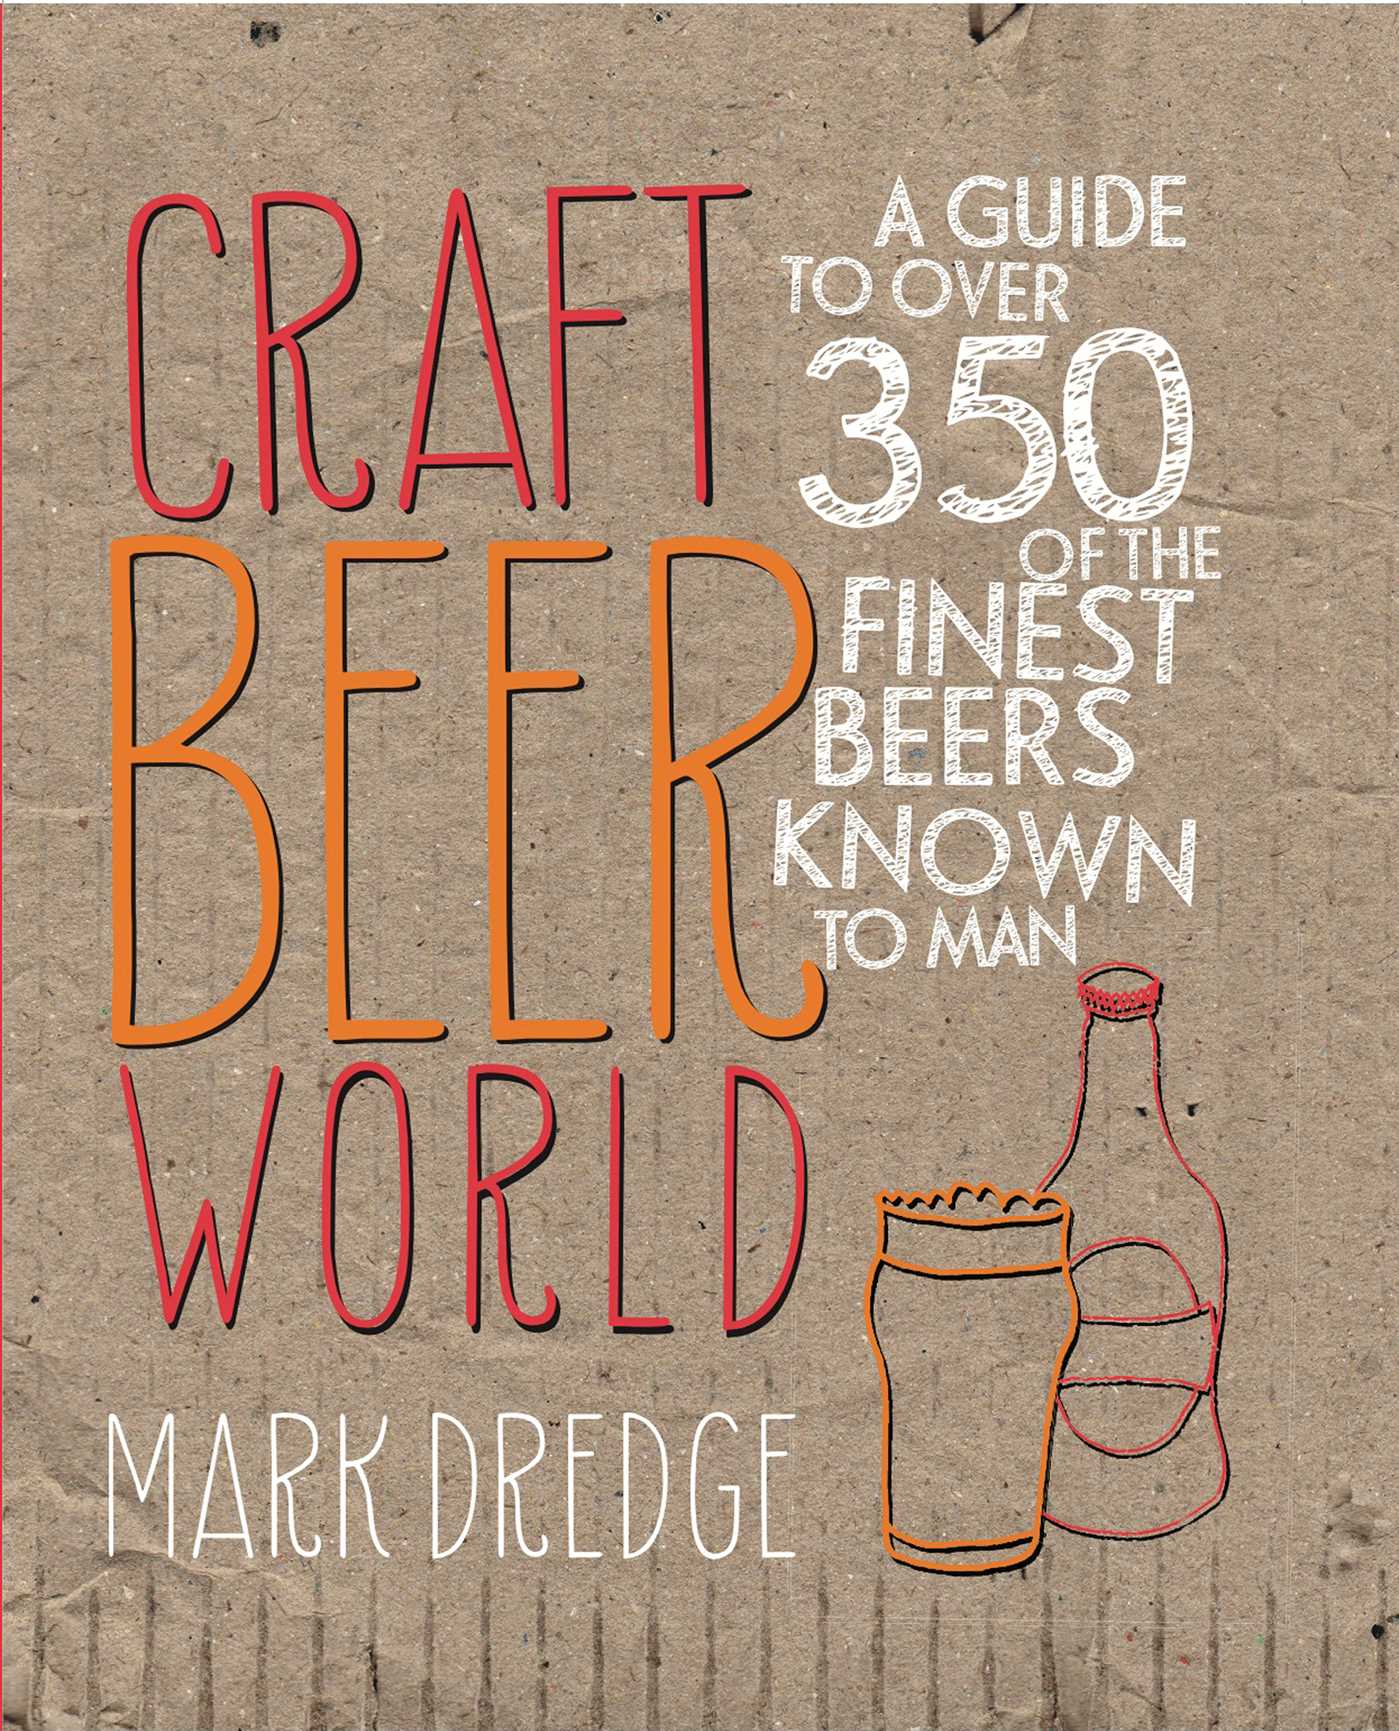 Craft Beer World : A guide to over 350 of the finest beers known to man